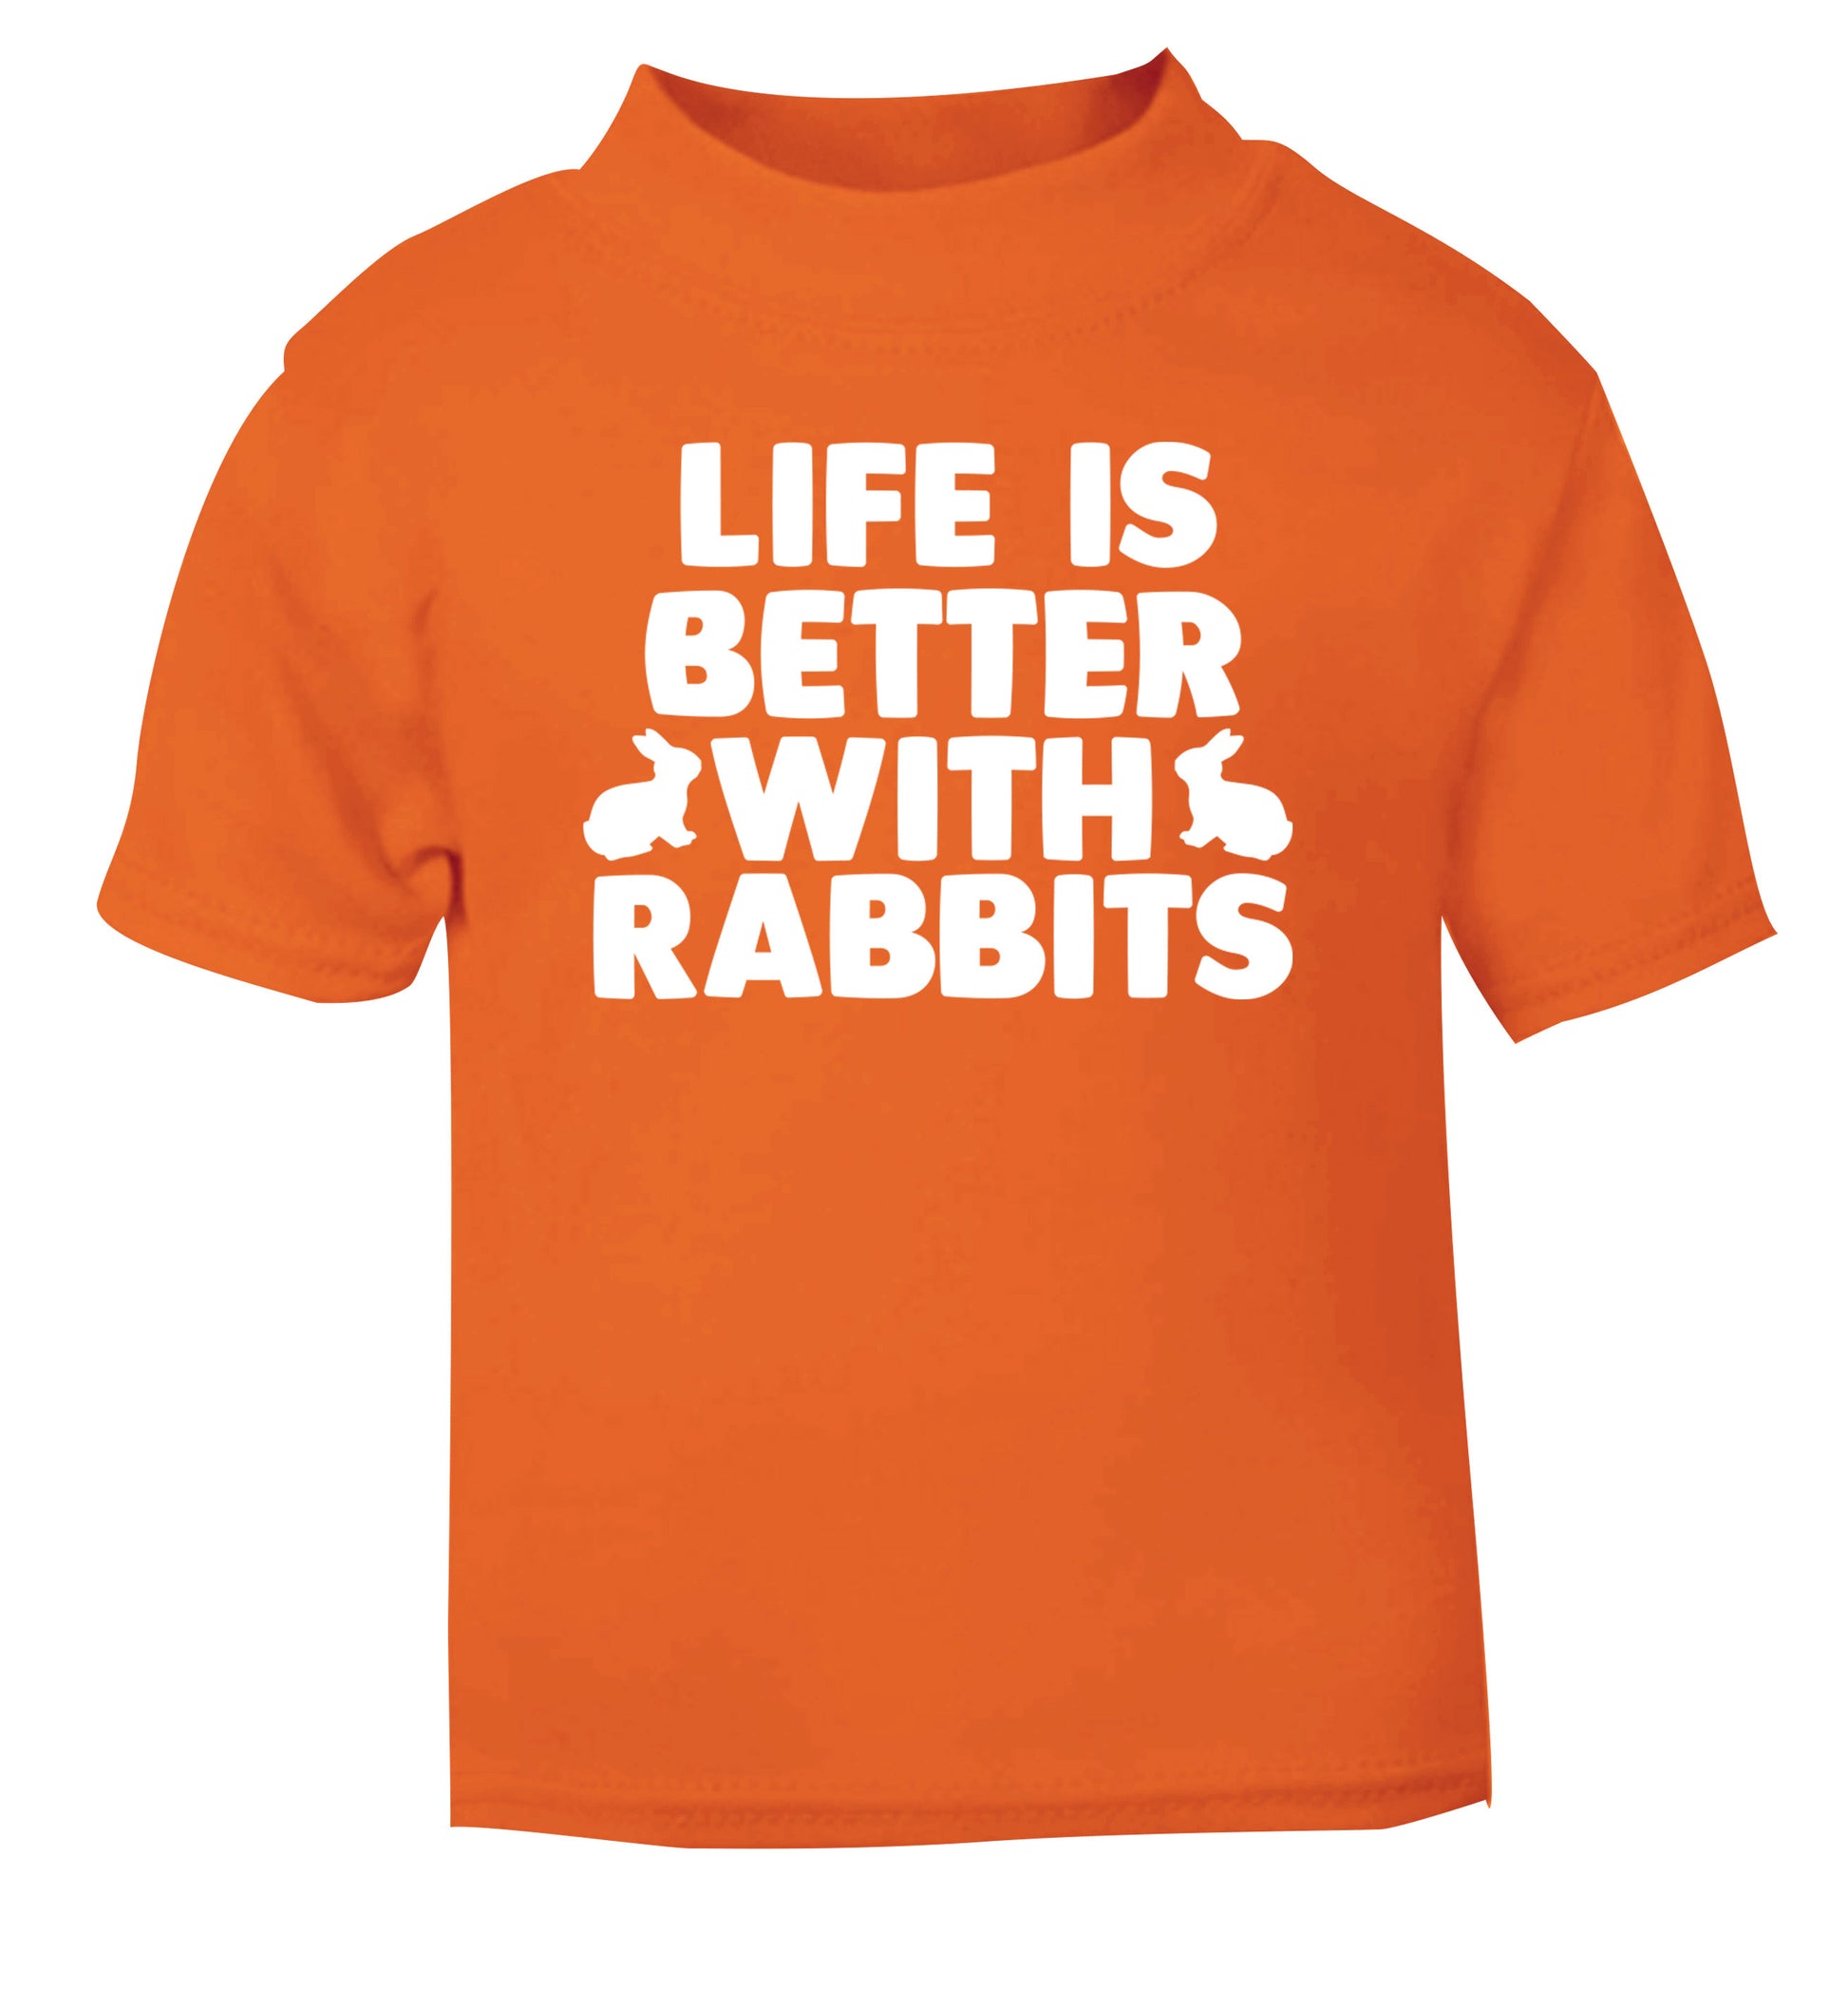 Life is better with rabbits orange Baby Toddler Tshirt 2 Years